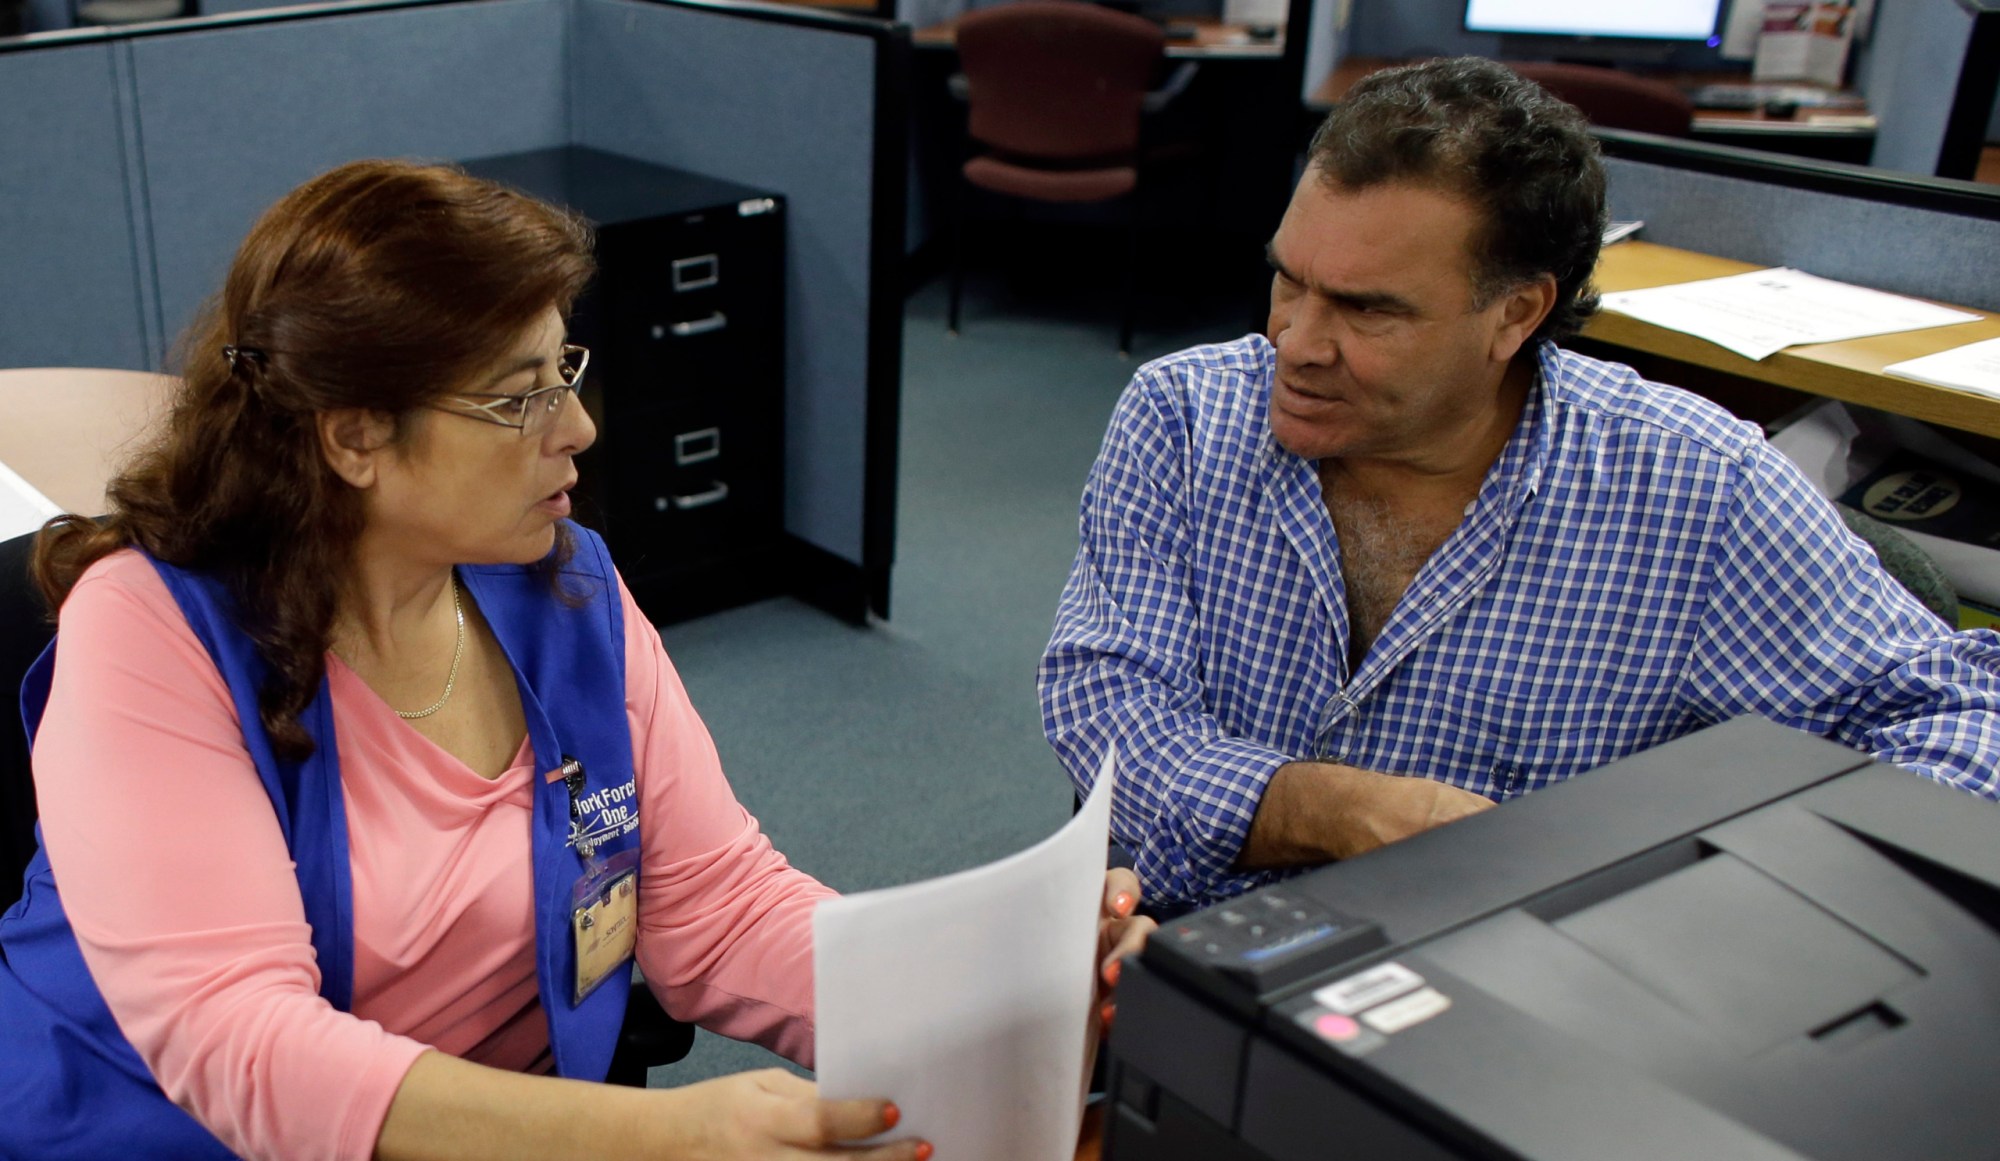 Rose Capote-Marcus, left, helps Waldemar Vega with problems he is having receiving his unemployment benefits at WorkForce One in Davie, Florida. (AP/Lynne Sladky)